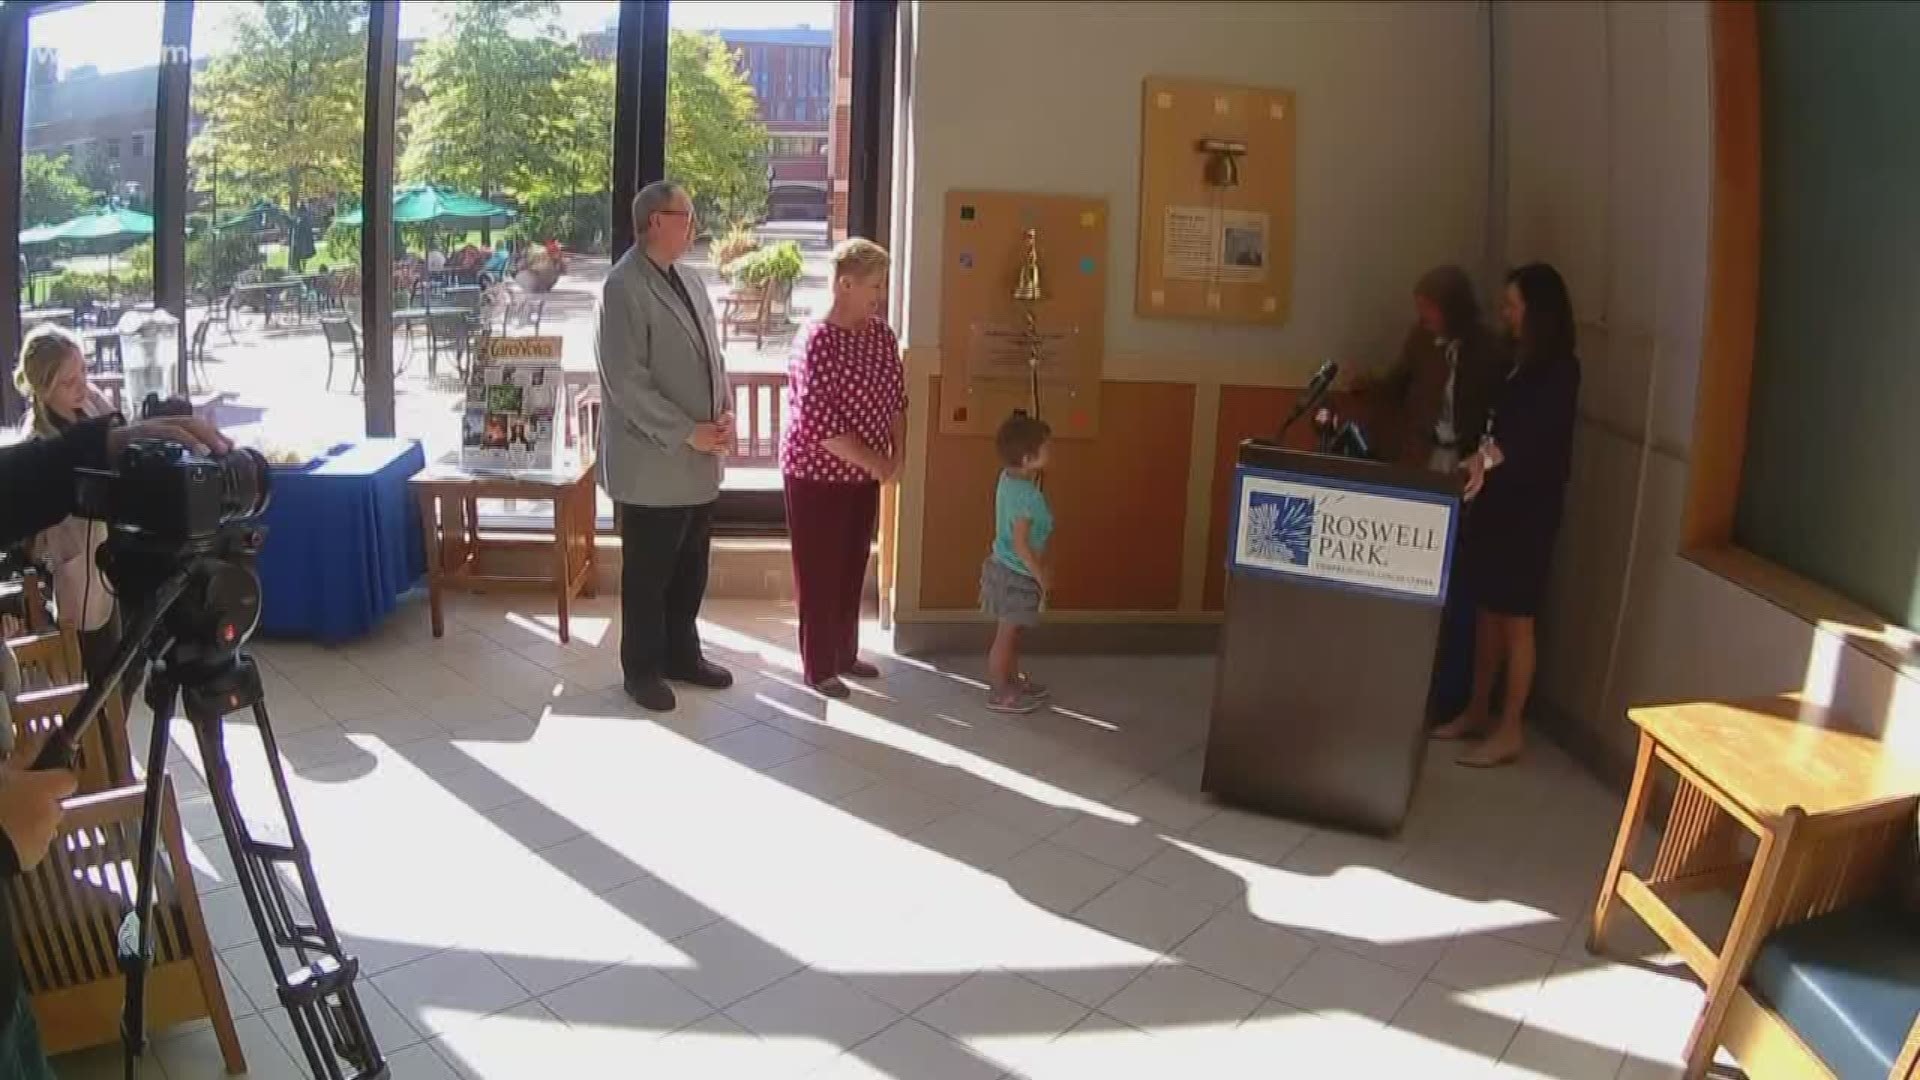 It's a momentous occasion in a cancer patient's fight: ringing the bell signaling the end of their treatment.